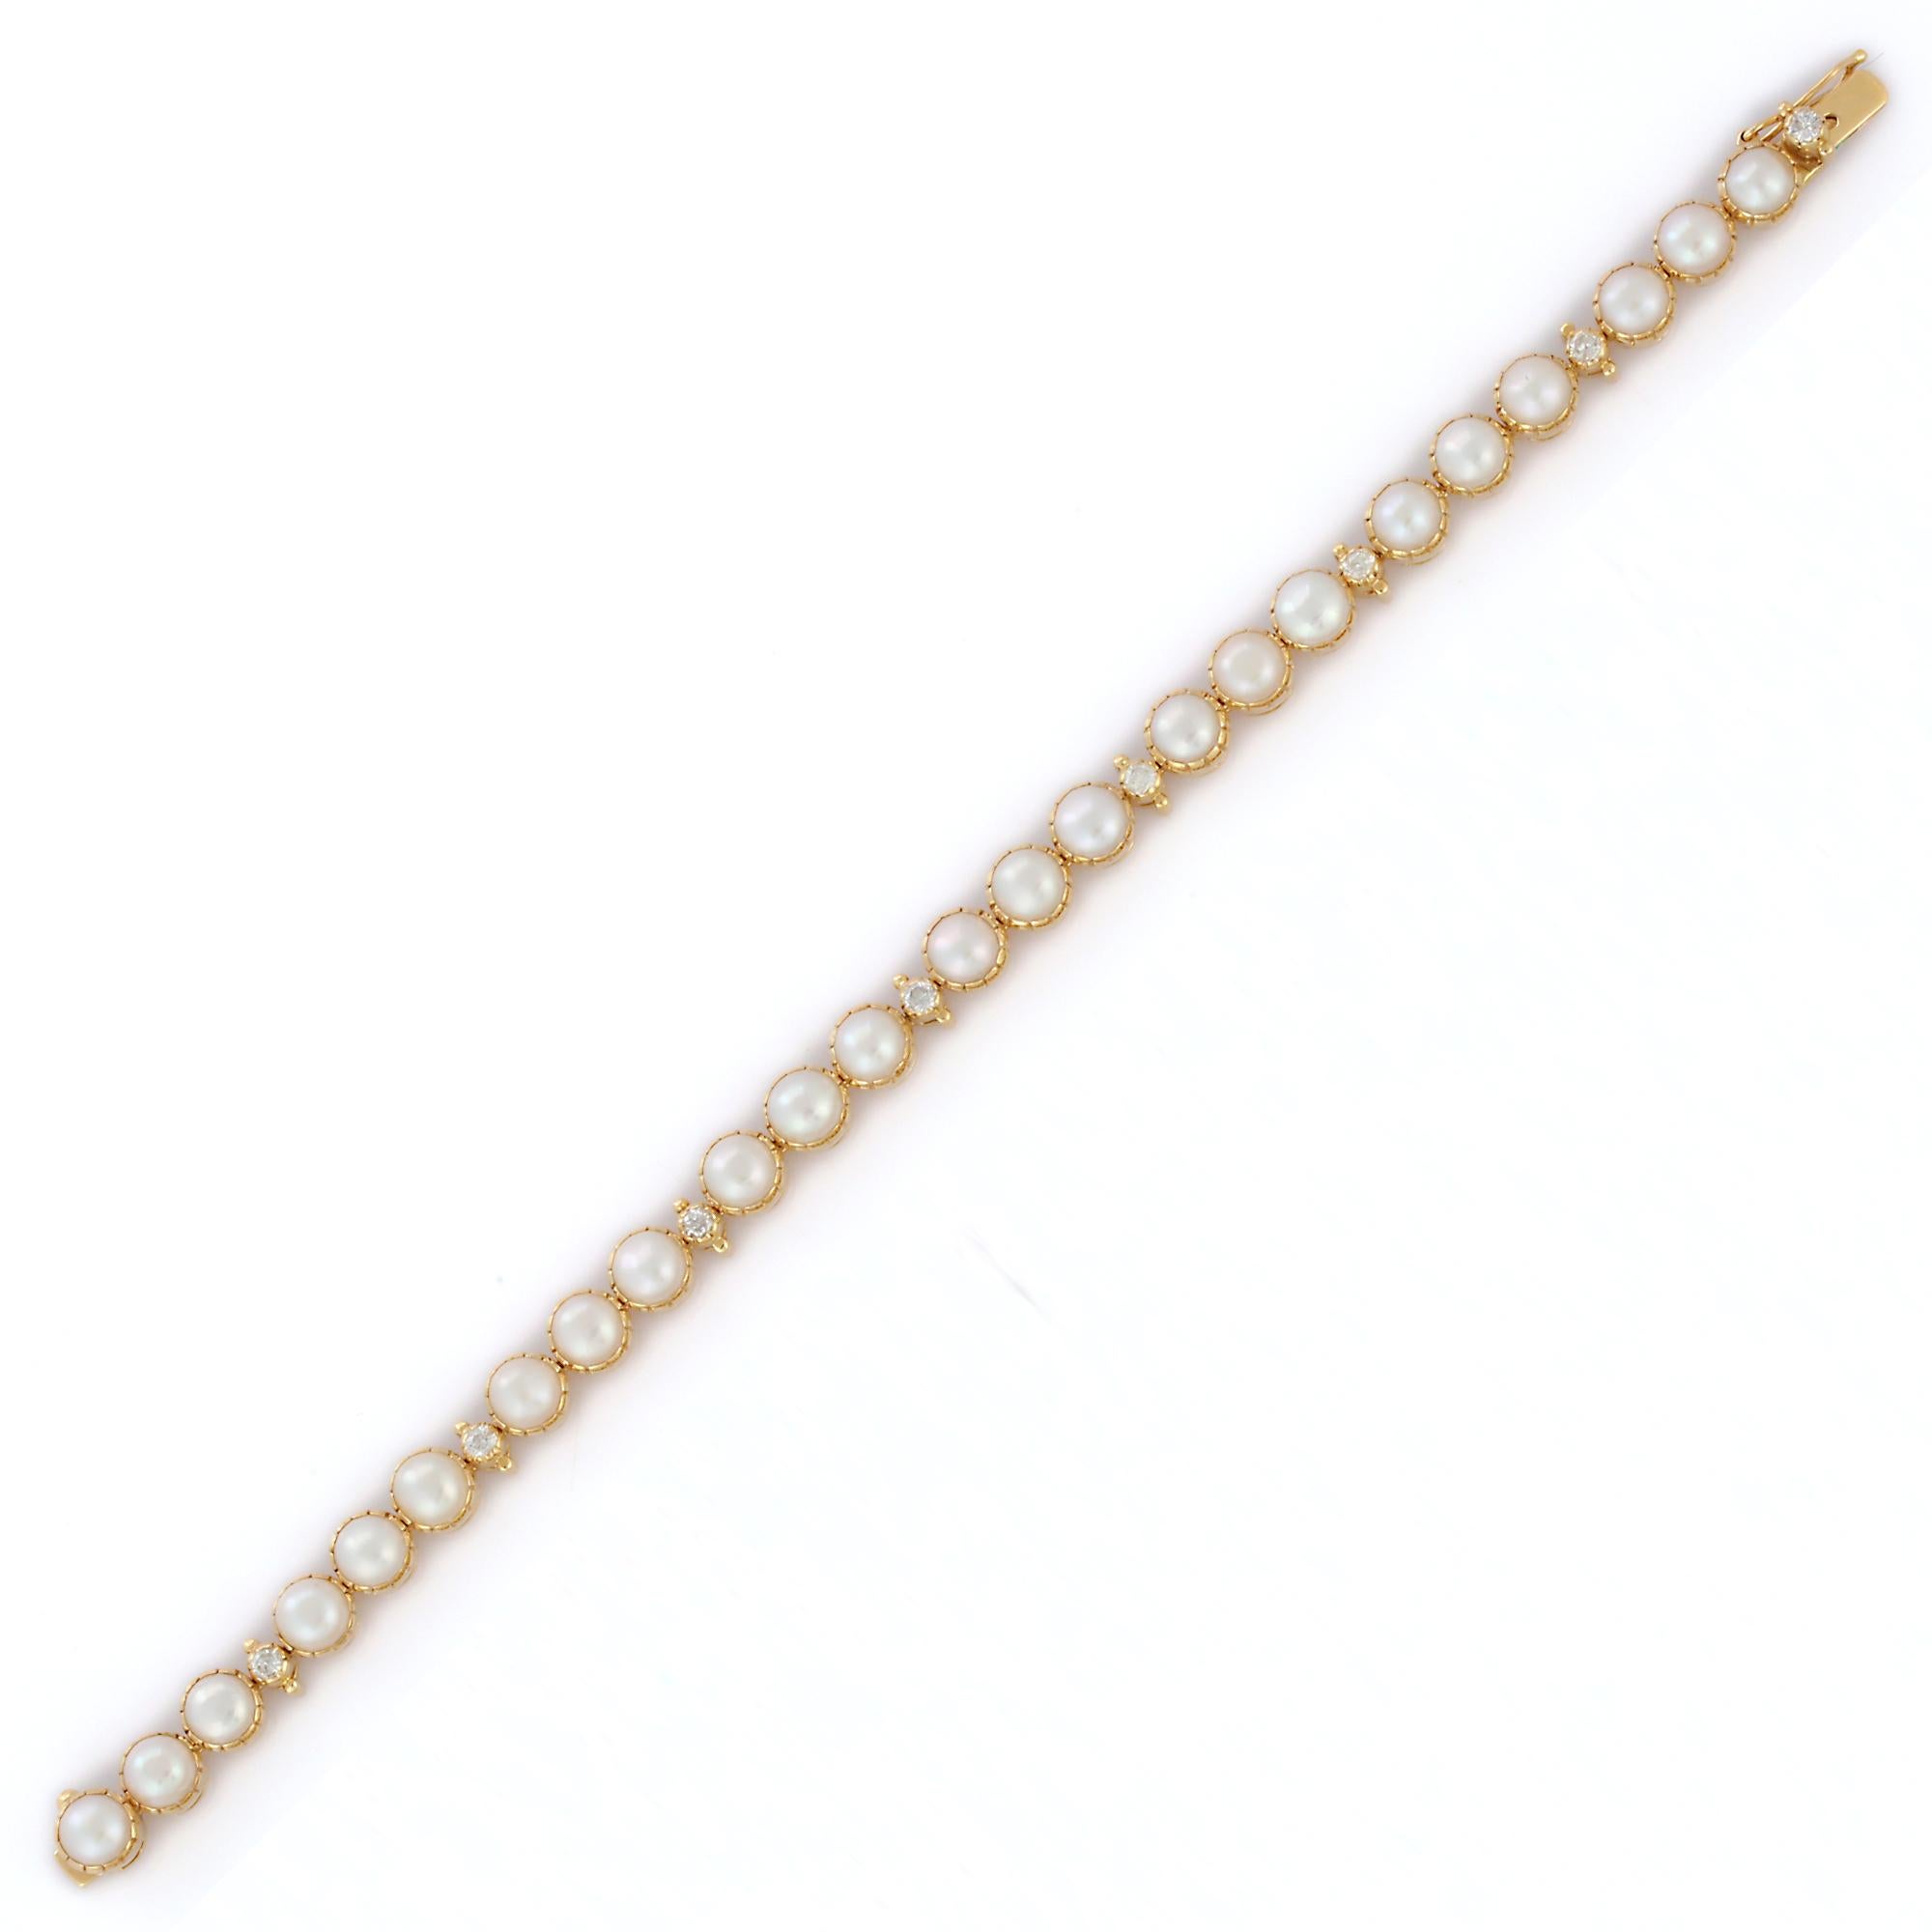 Pearl and diamonds bracelet in 18K Gold. It has a perfect round cut gemstone to make you stand out on any occasion or an event. 
A tennis bracelet is an essential piece of jewelry when it comes to your wedding day. The sleek and elegant style